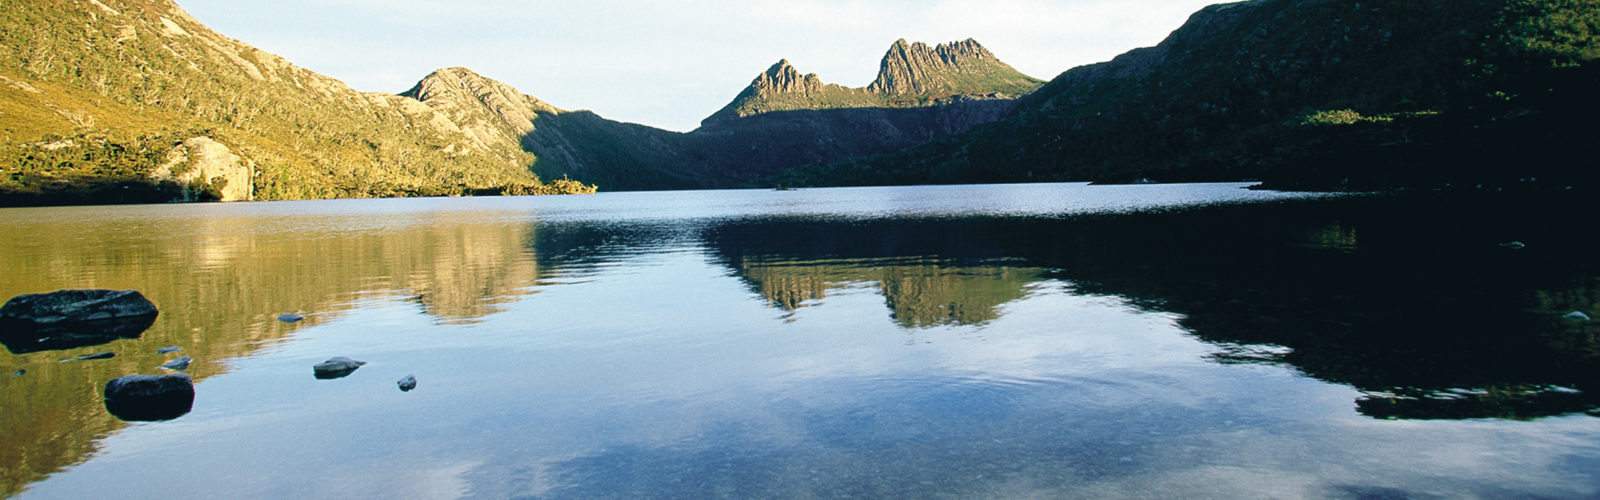 peppers-cradle-mountain-lake